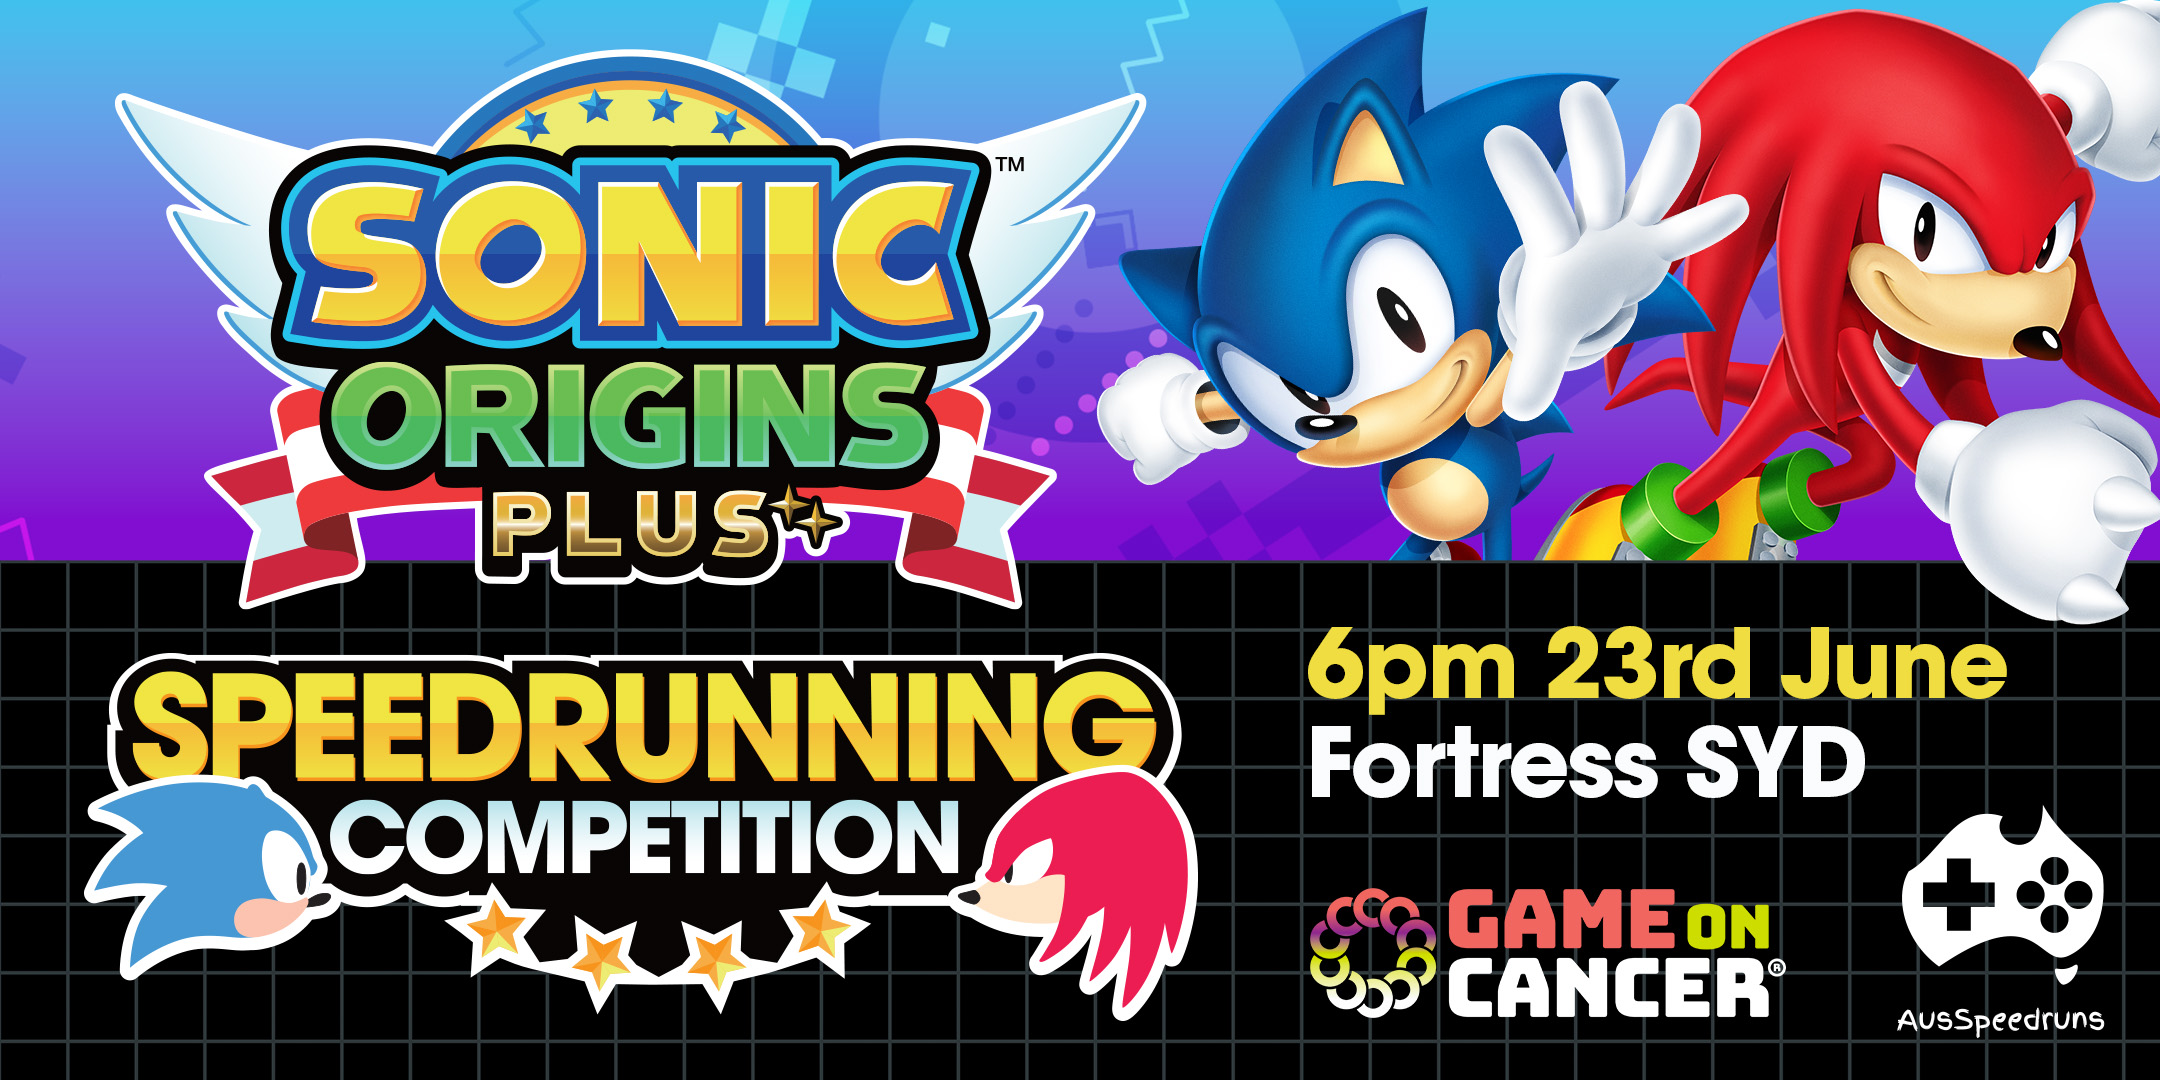 Like Sonic? Like speedrunning? Well, there is a charity event for